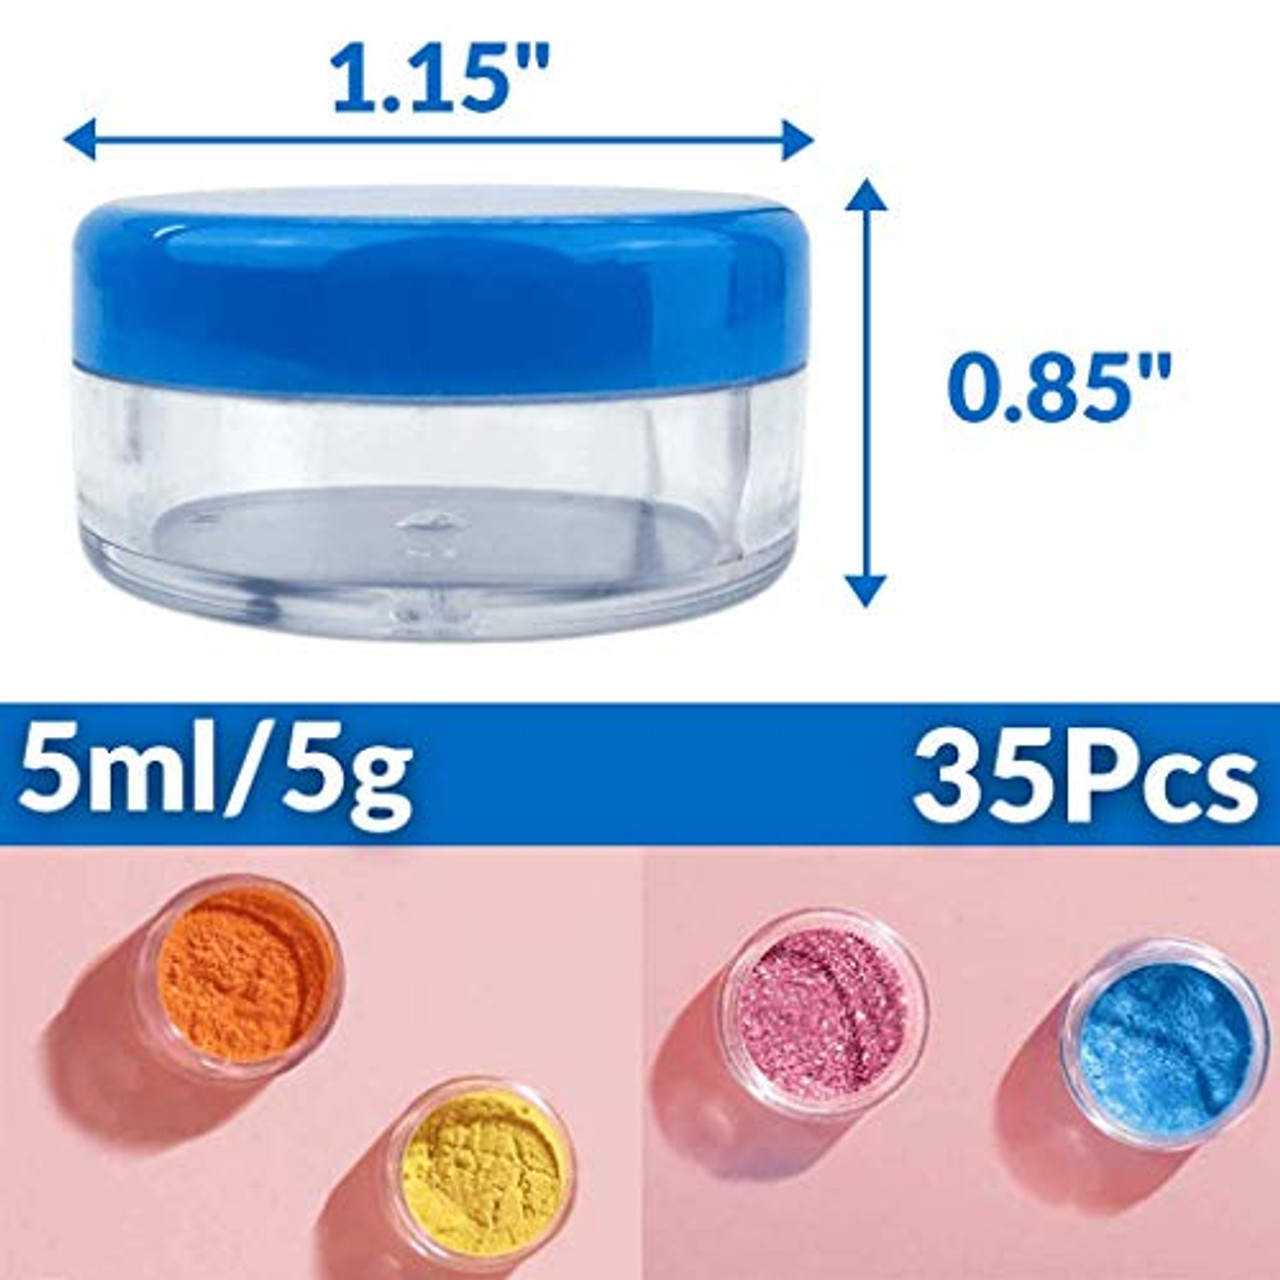 5ml/5g Small Containers With Lids - 35Pcs Plastic Jars With Lids (Blue) - Small  Plastic Containers With